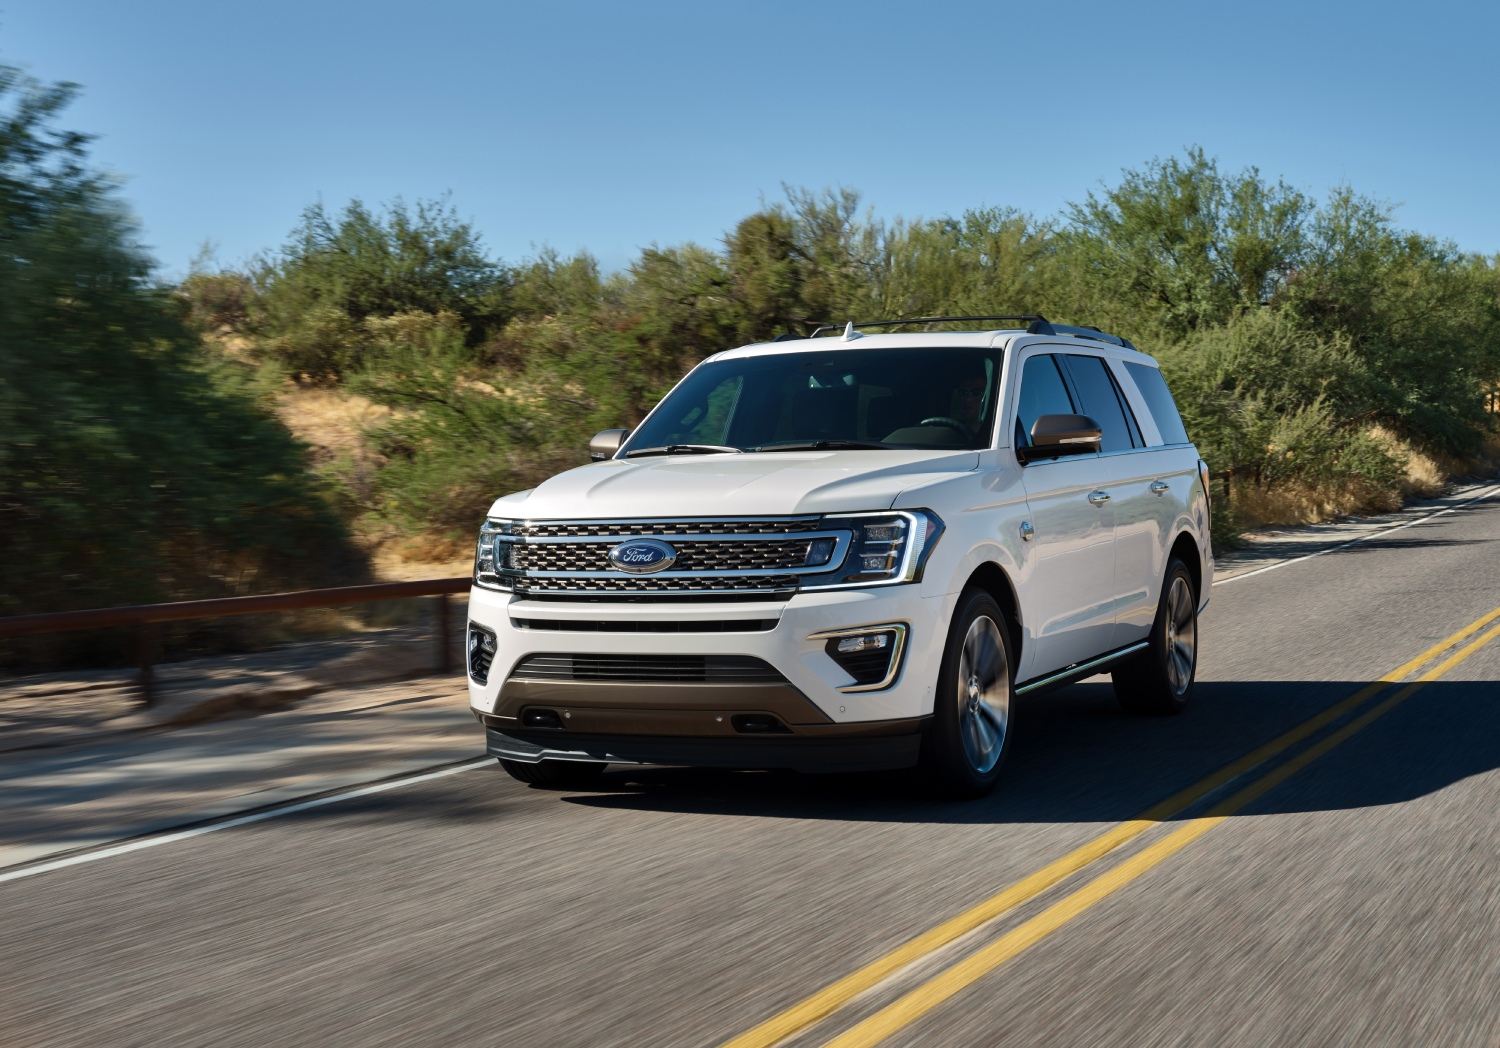 The best used Ford Expedition SUV years like this 2020 version